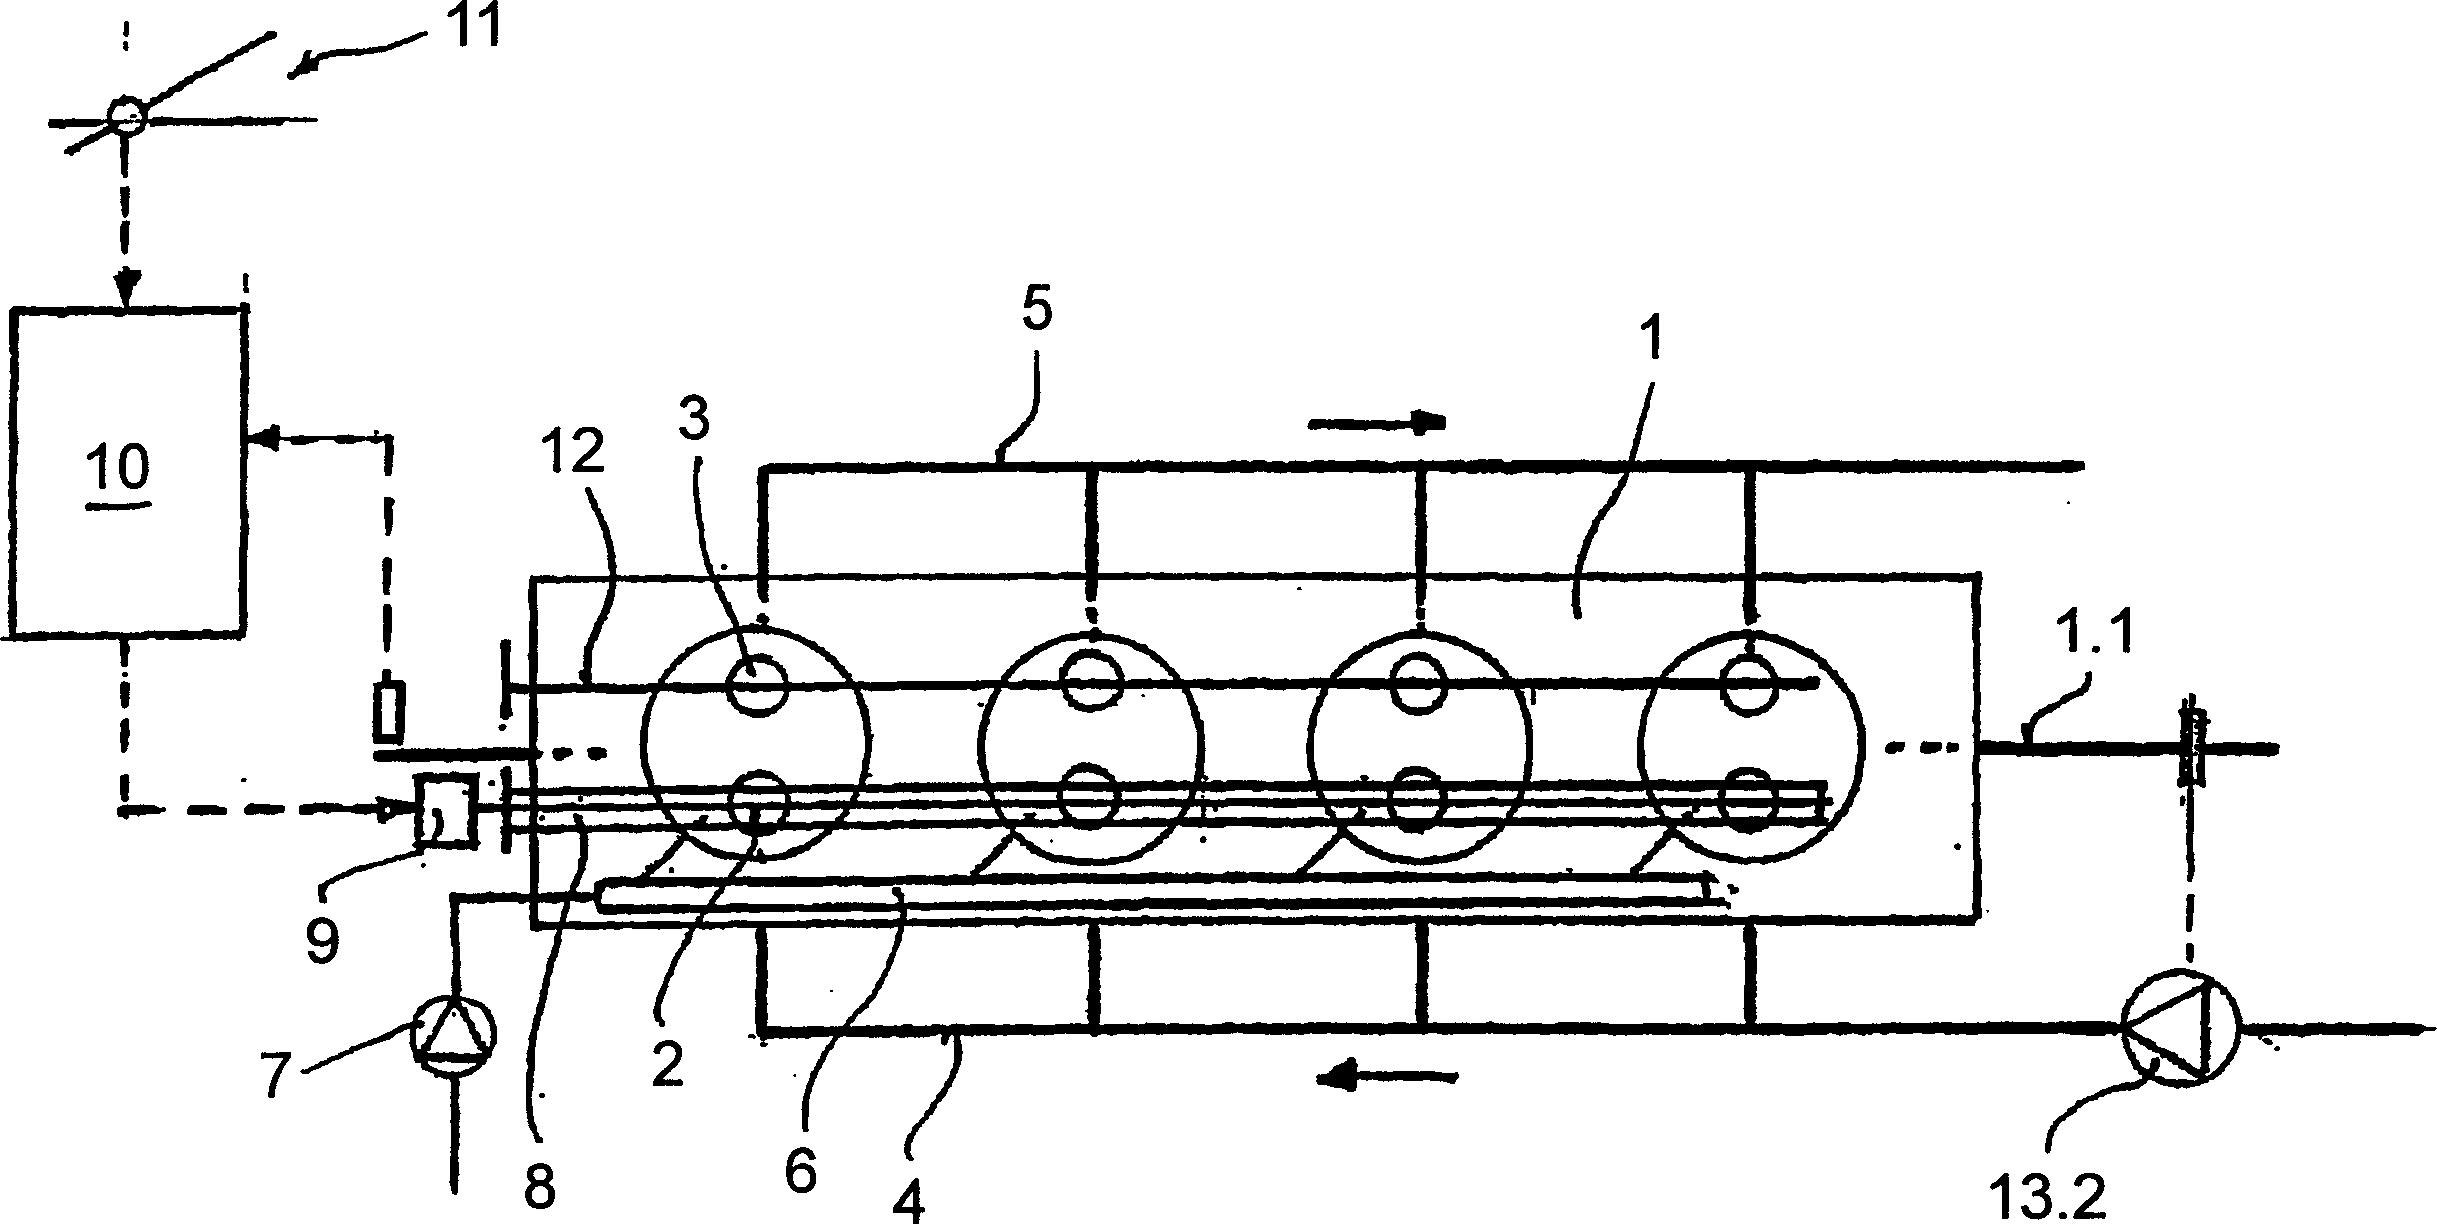 Method for optimizing the operation of a charged reciprocating internal combustion engine in the lower engine speed range